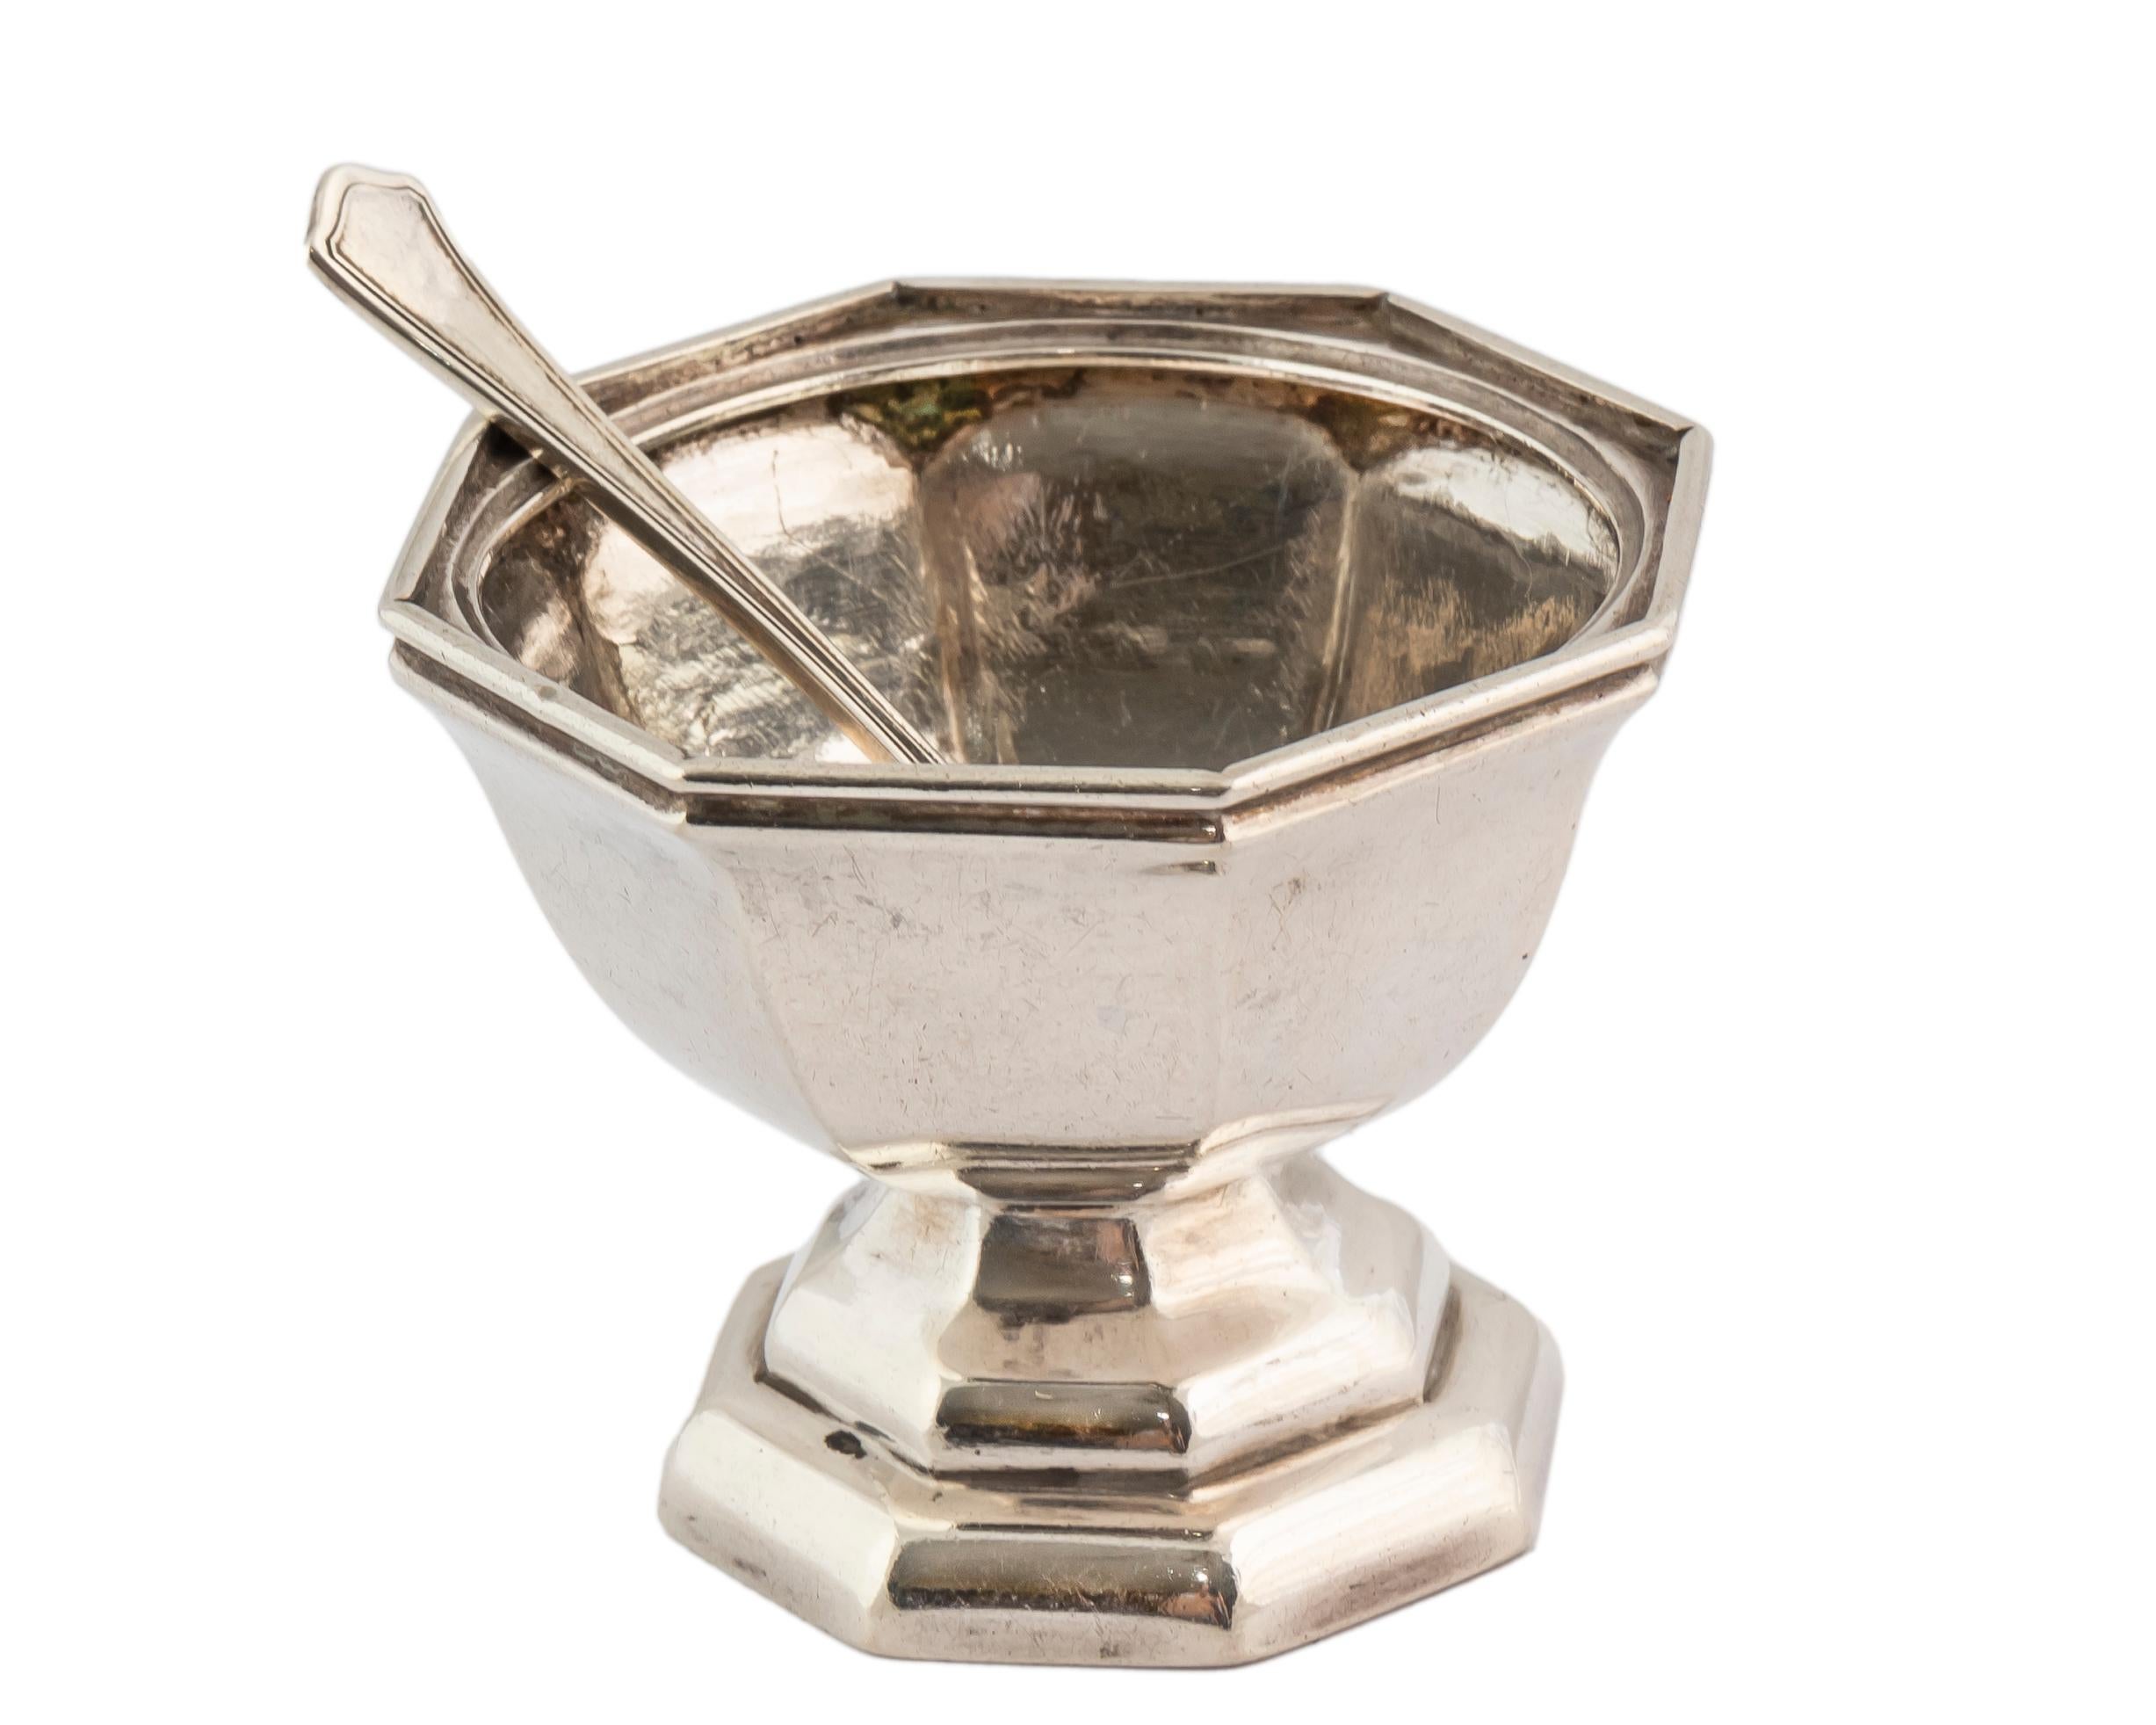 Charming miniature Dutch octagonal bowl possibly patterned on a sugar bowl first introduced in the Netherlands in the 18th century, on an octagonal pedestal stand, made in 1918, together with a tiny silver spoon.  

In early 18th century Netherlands